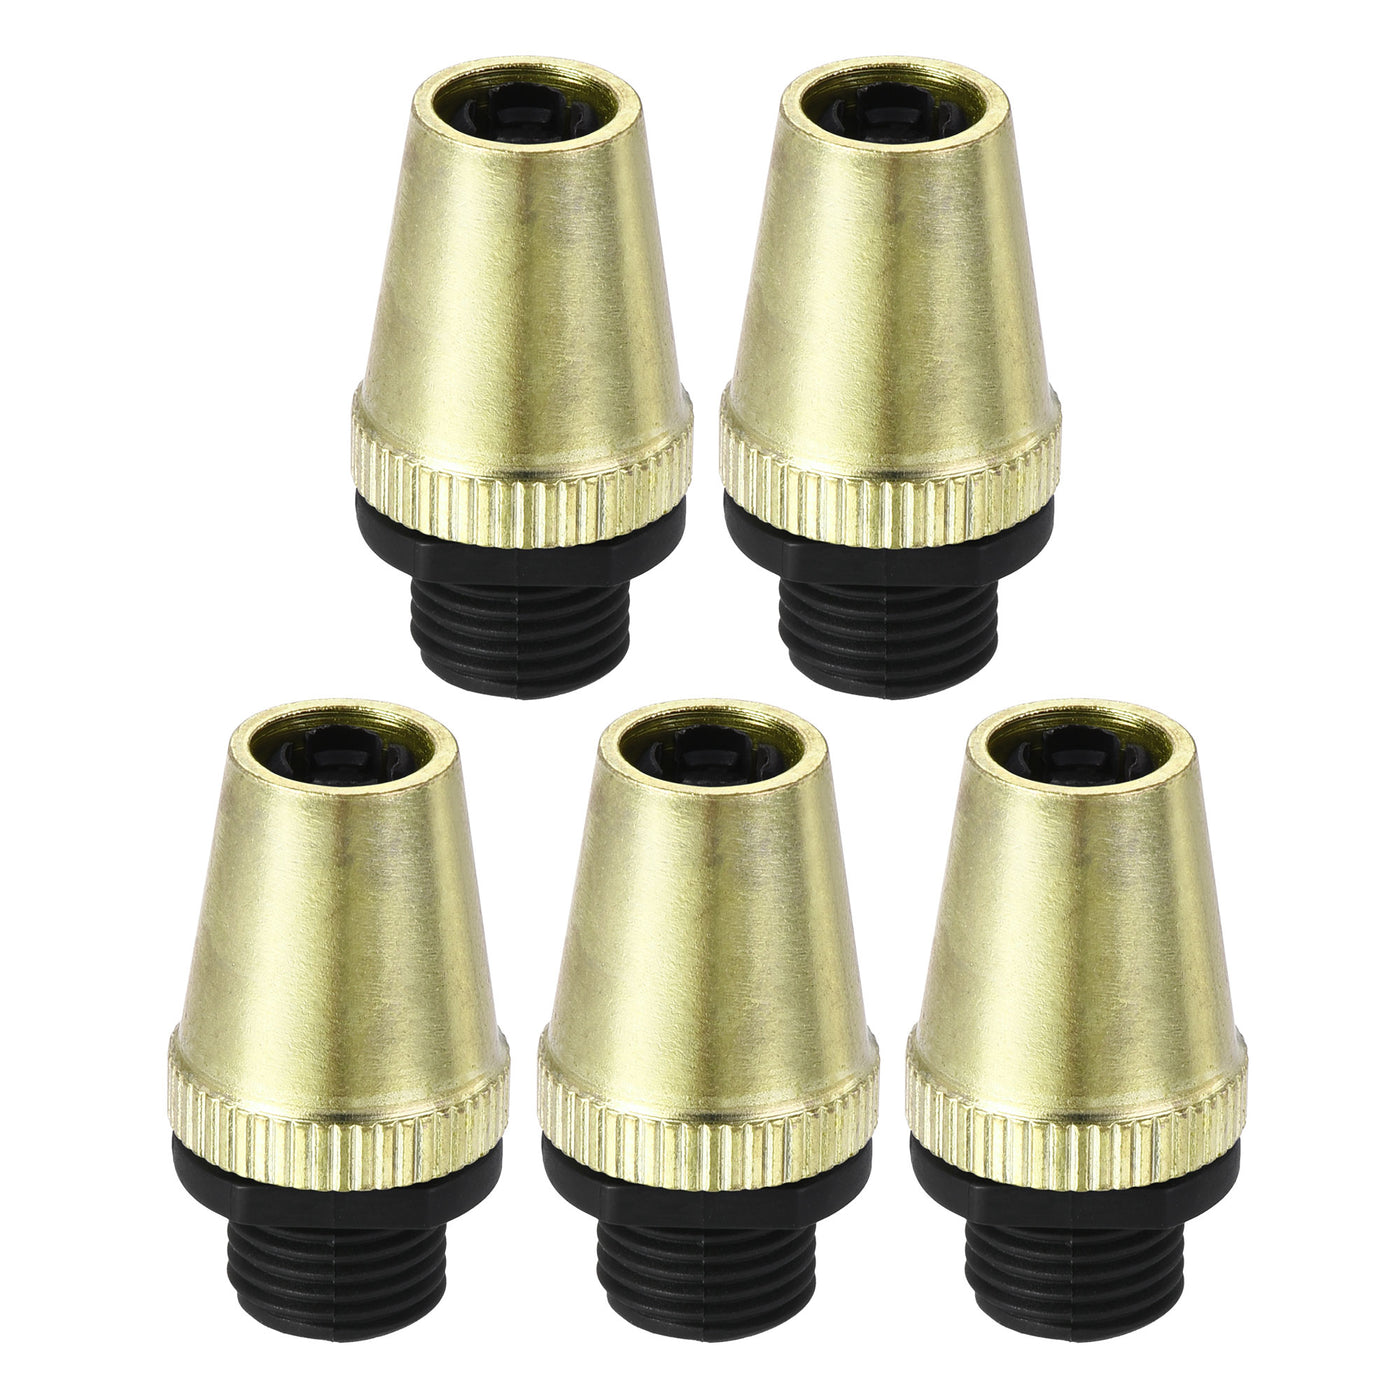 uxcell Uxcell Cable Glands Strain Relief Cord Grips Metal Gold Tone 5Pcs for Wiring Hanging Light Ceiling Pendant Lamp